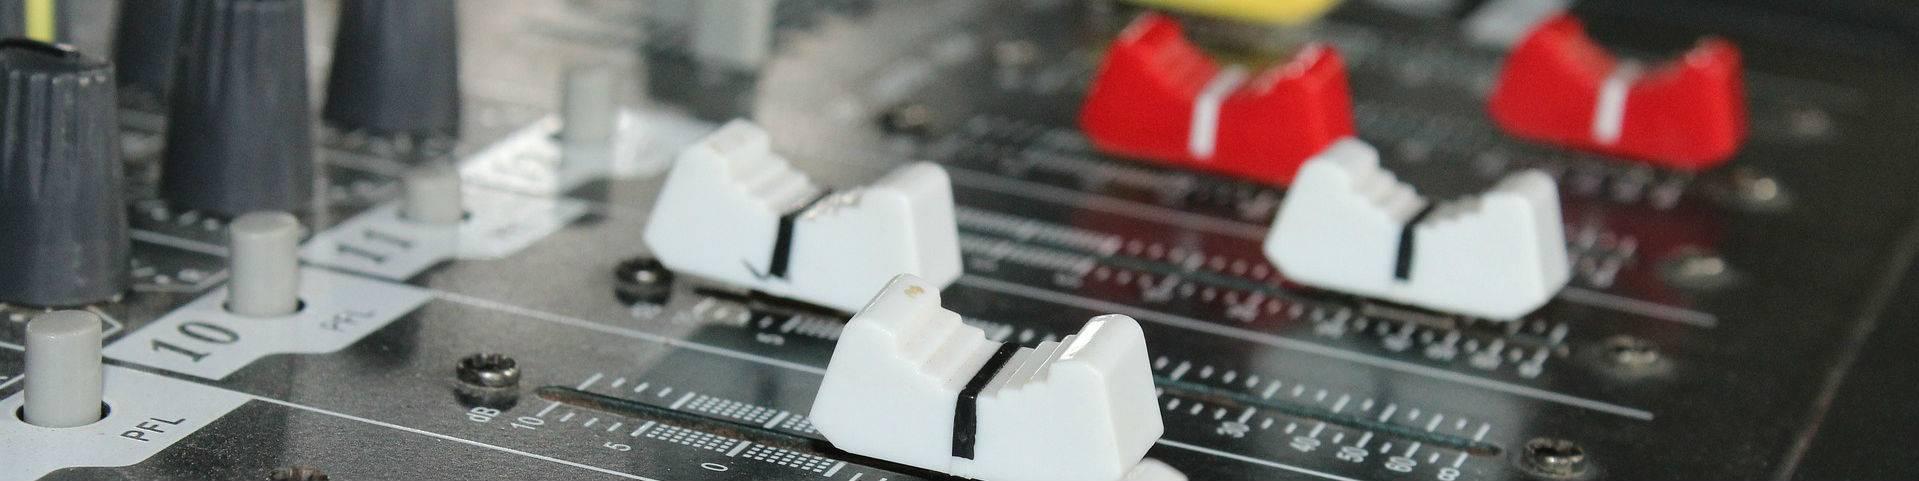 Faders on an analogue desk using for audio summing